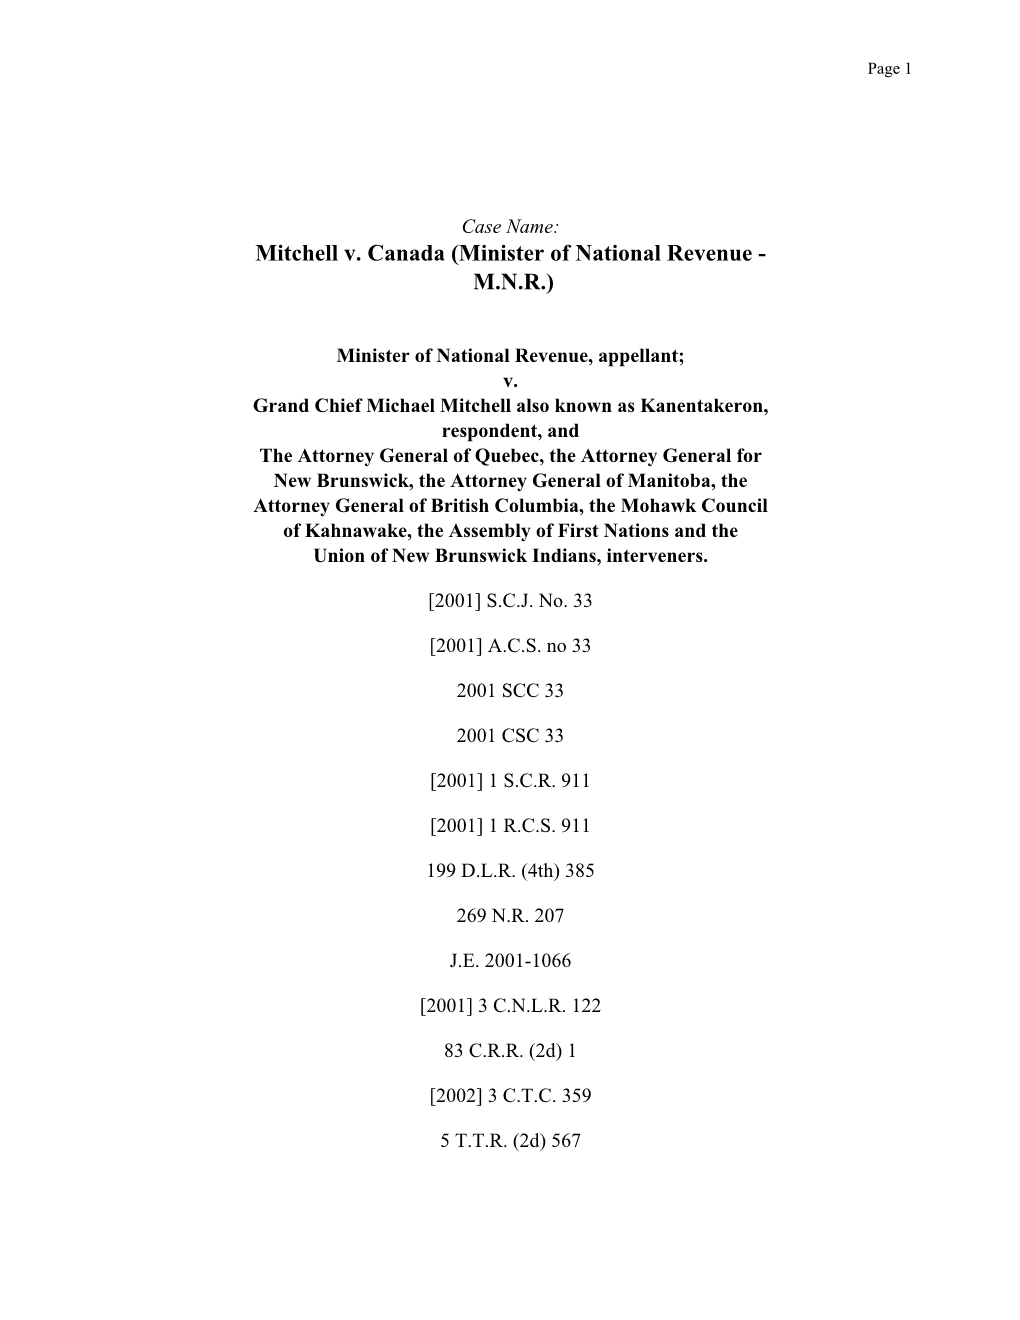 Mitchell V. Canada (Minister of National Revenue - M.N.R.)